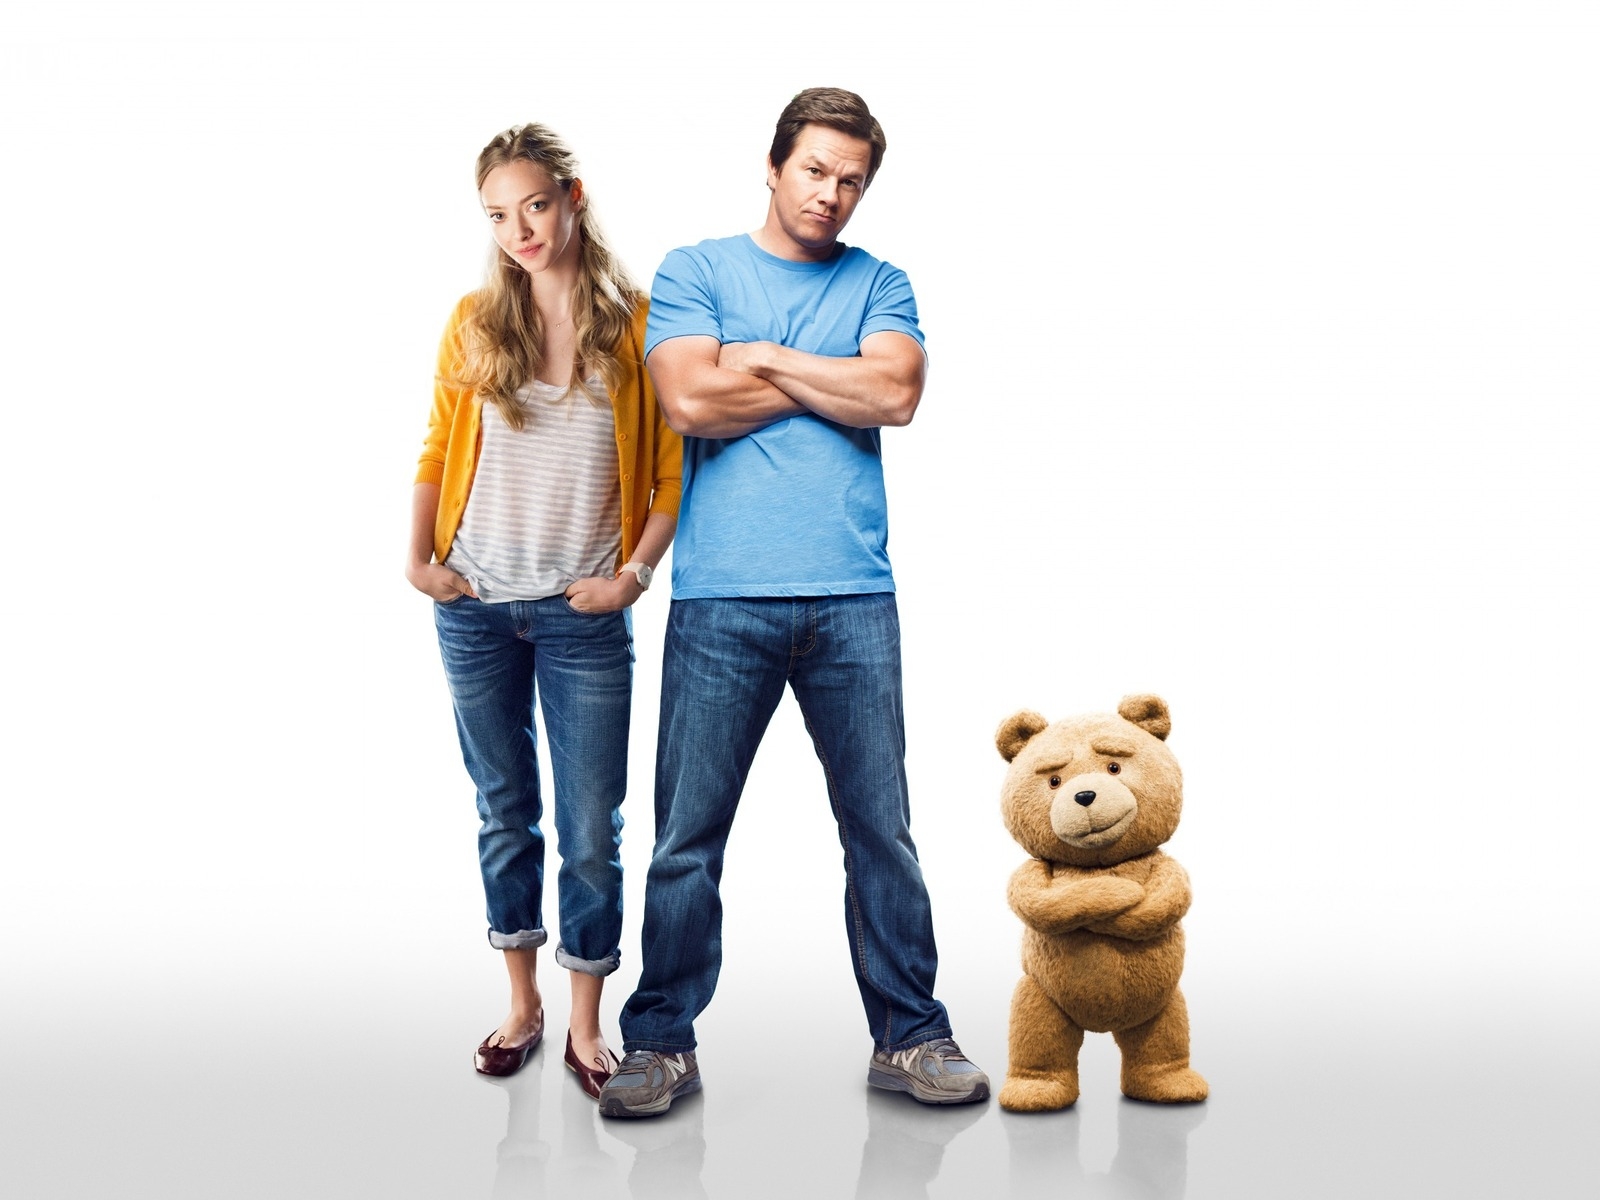 Ted 2 for 1600 x 1200 resolution